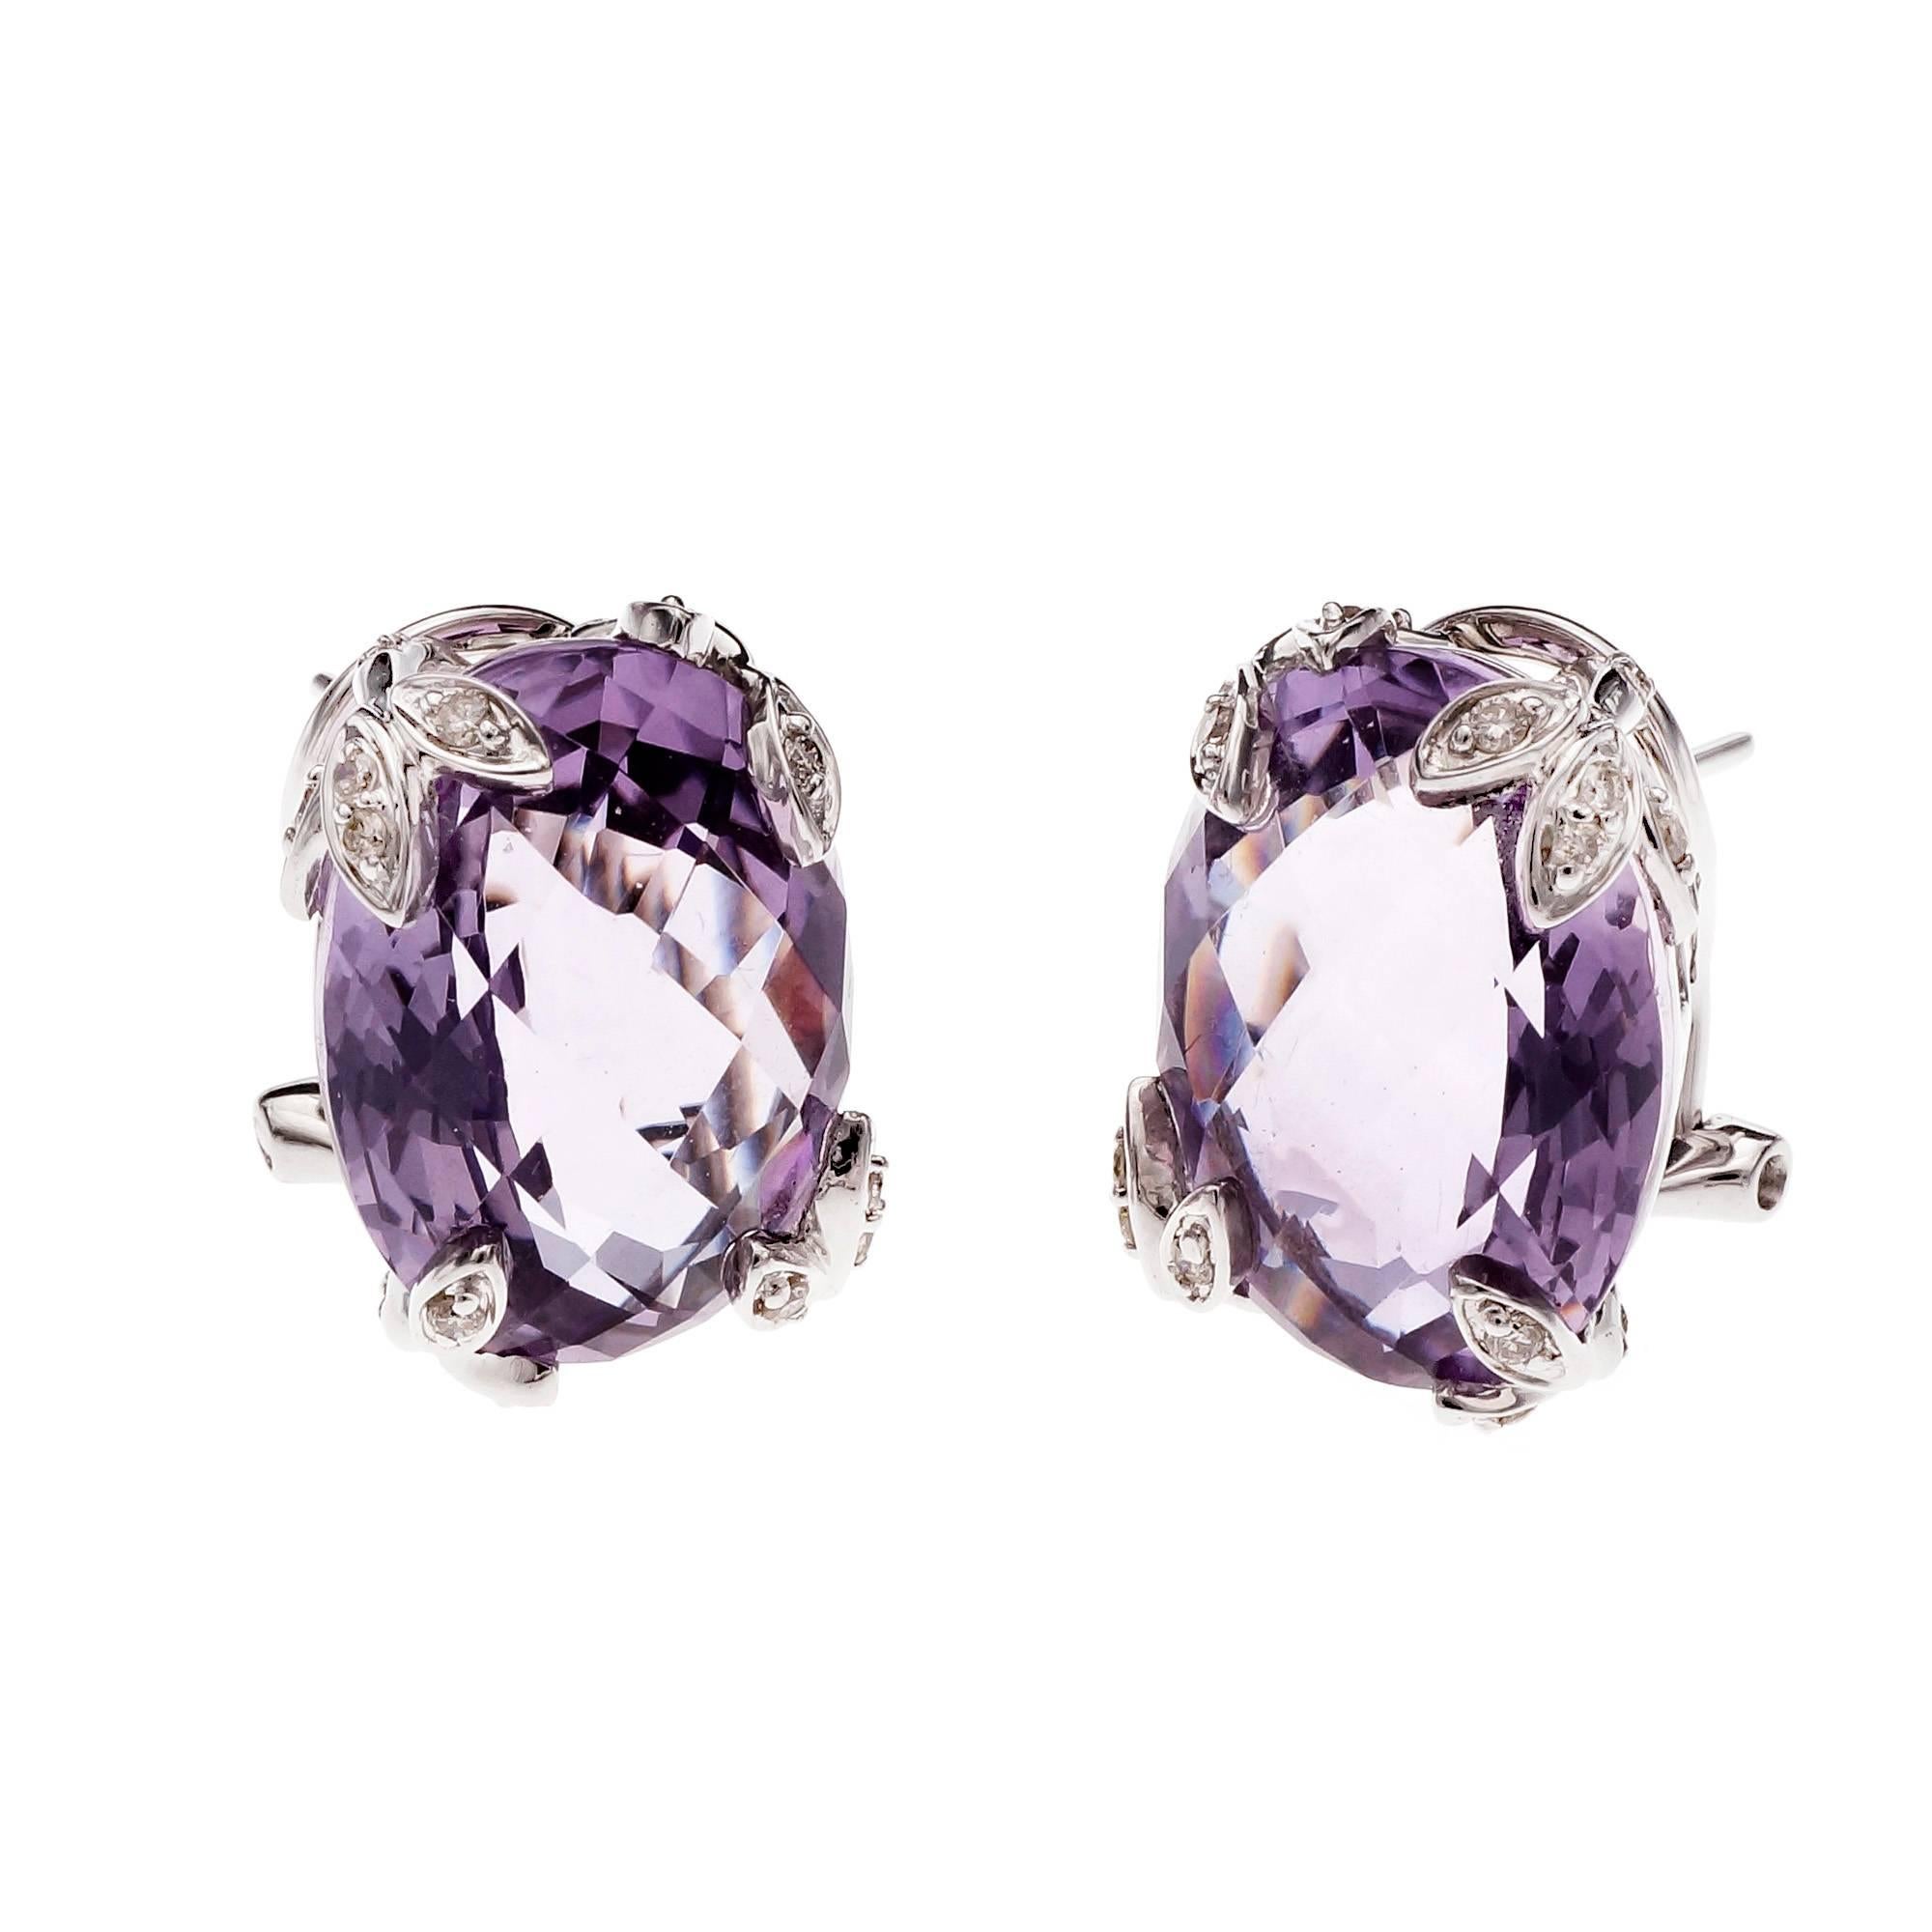 Bright medium purple domed faceted Amethyst Diamond white gold earrings.

2 oval medium purple Amethyst, approx. total weight 16.00cts, VS, 15.32 x 12.08 x 8.46mm
40 round Diamonds, approx. total weight .28cts
14k white gold
Tested: 14k
Stamped: 14k